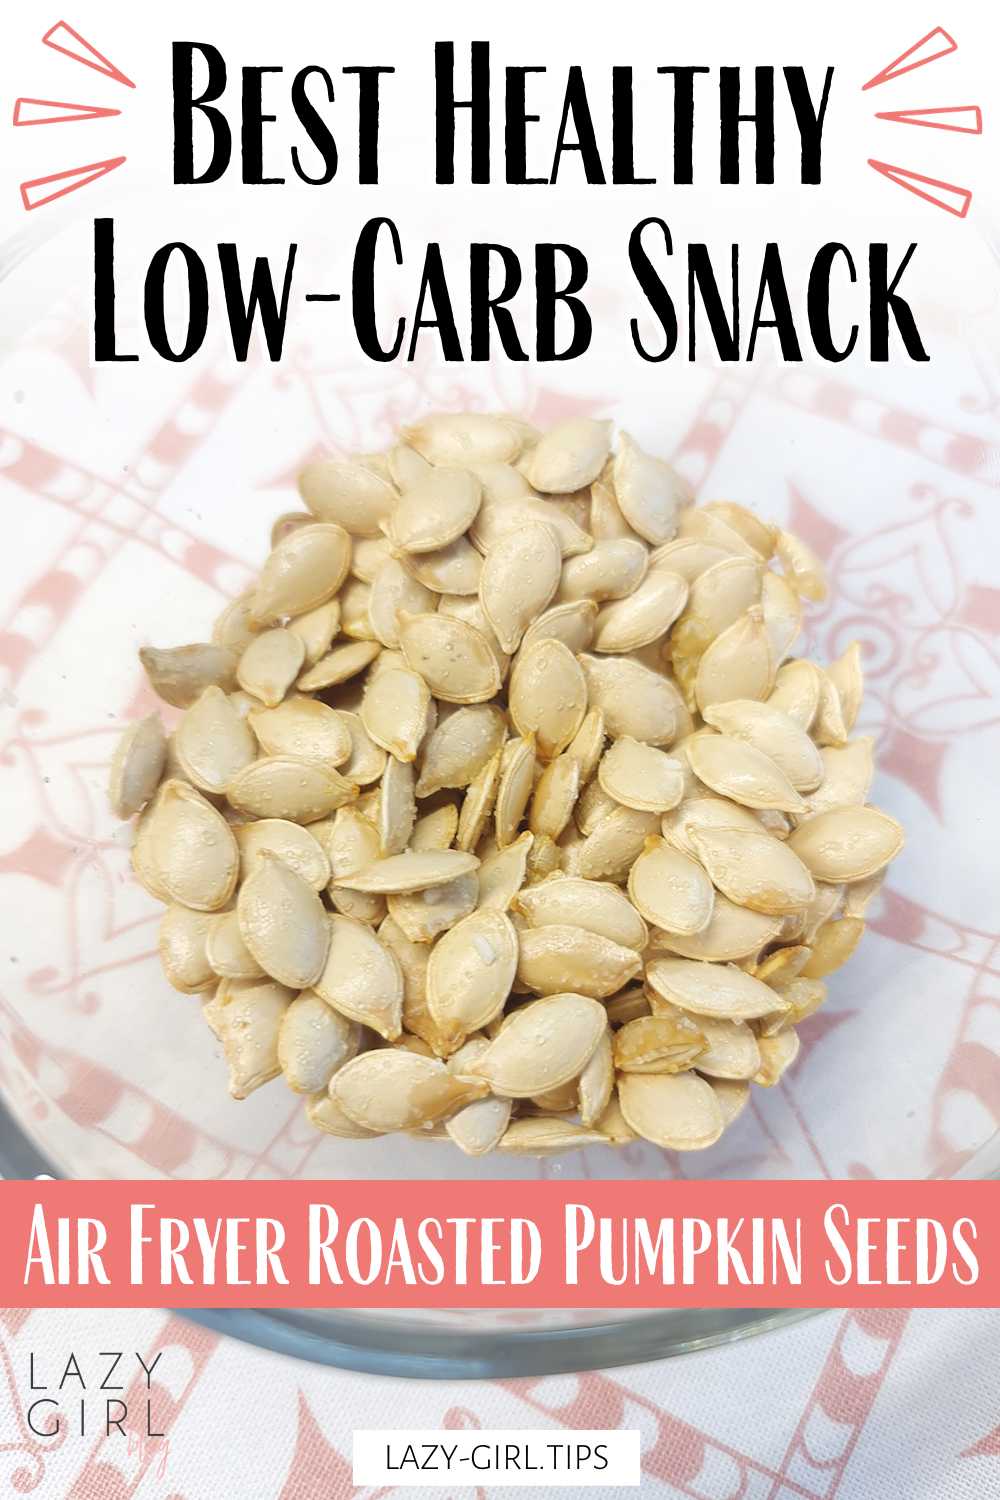 Air Fryer Roasted Pumpkin Seeds recipe A Low-Carb, Healthy and Delicious Snack for Fall